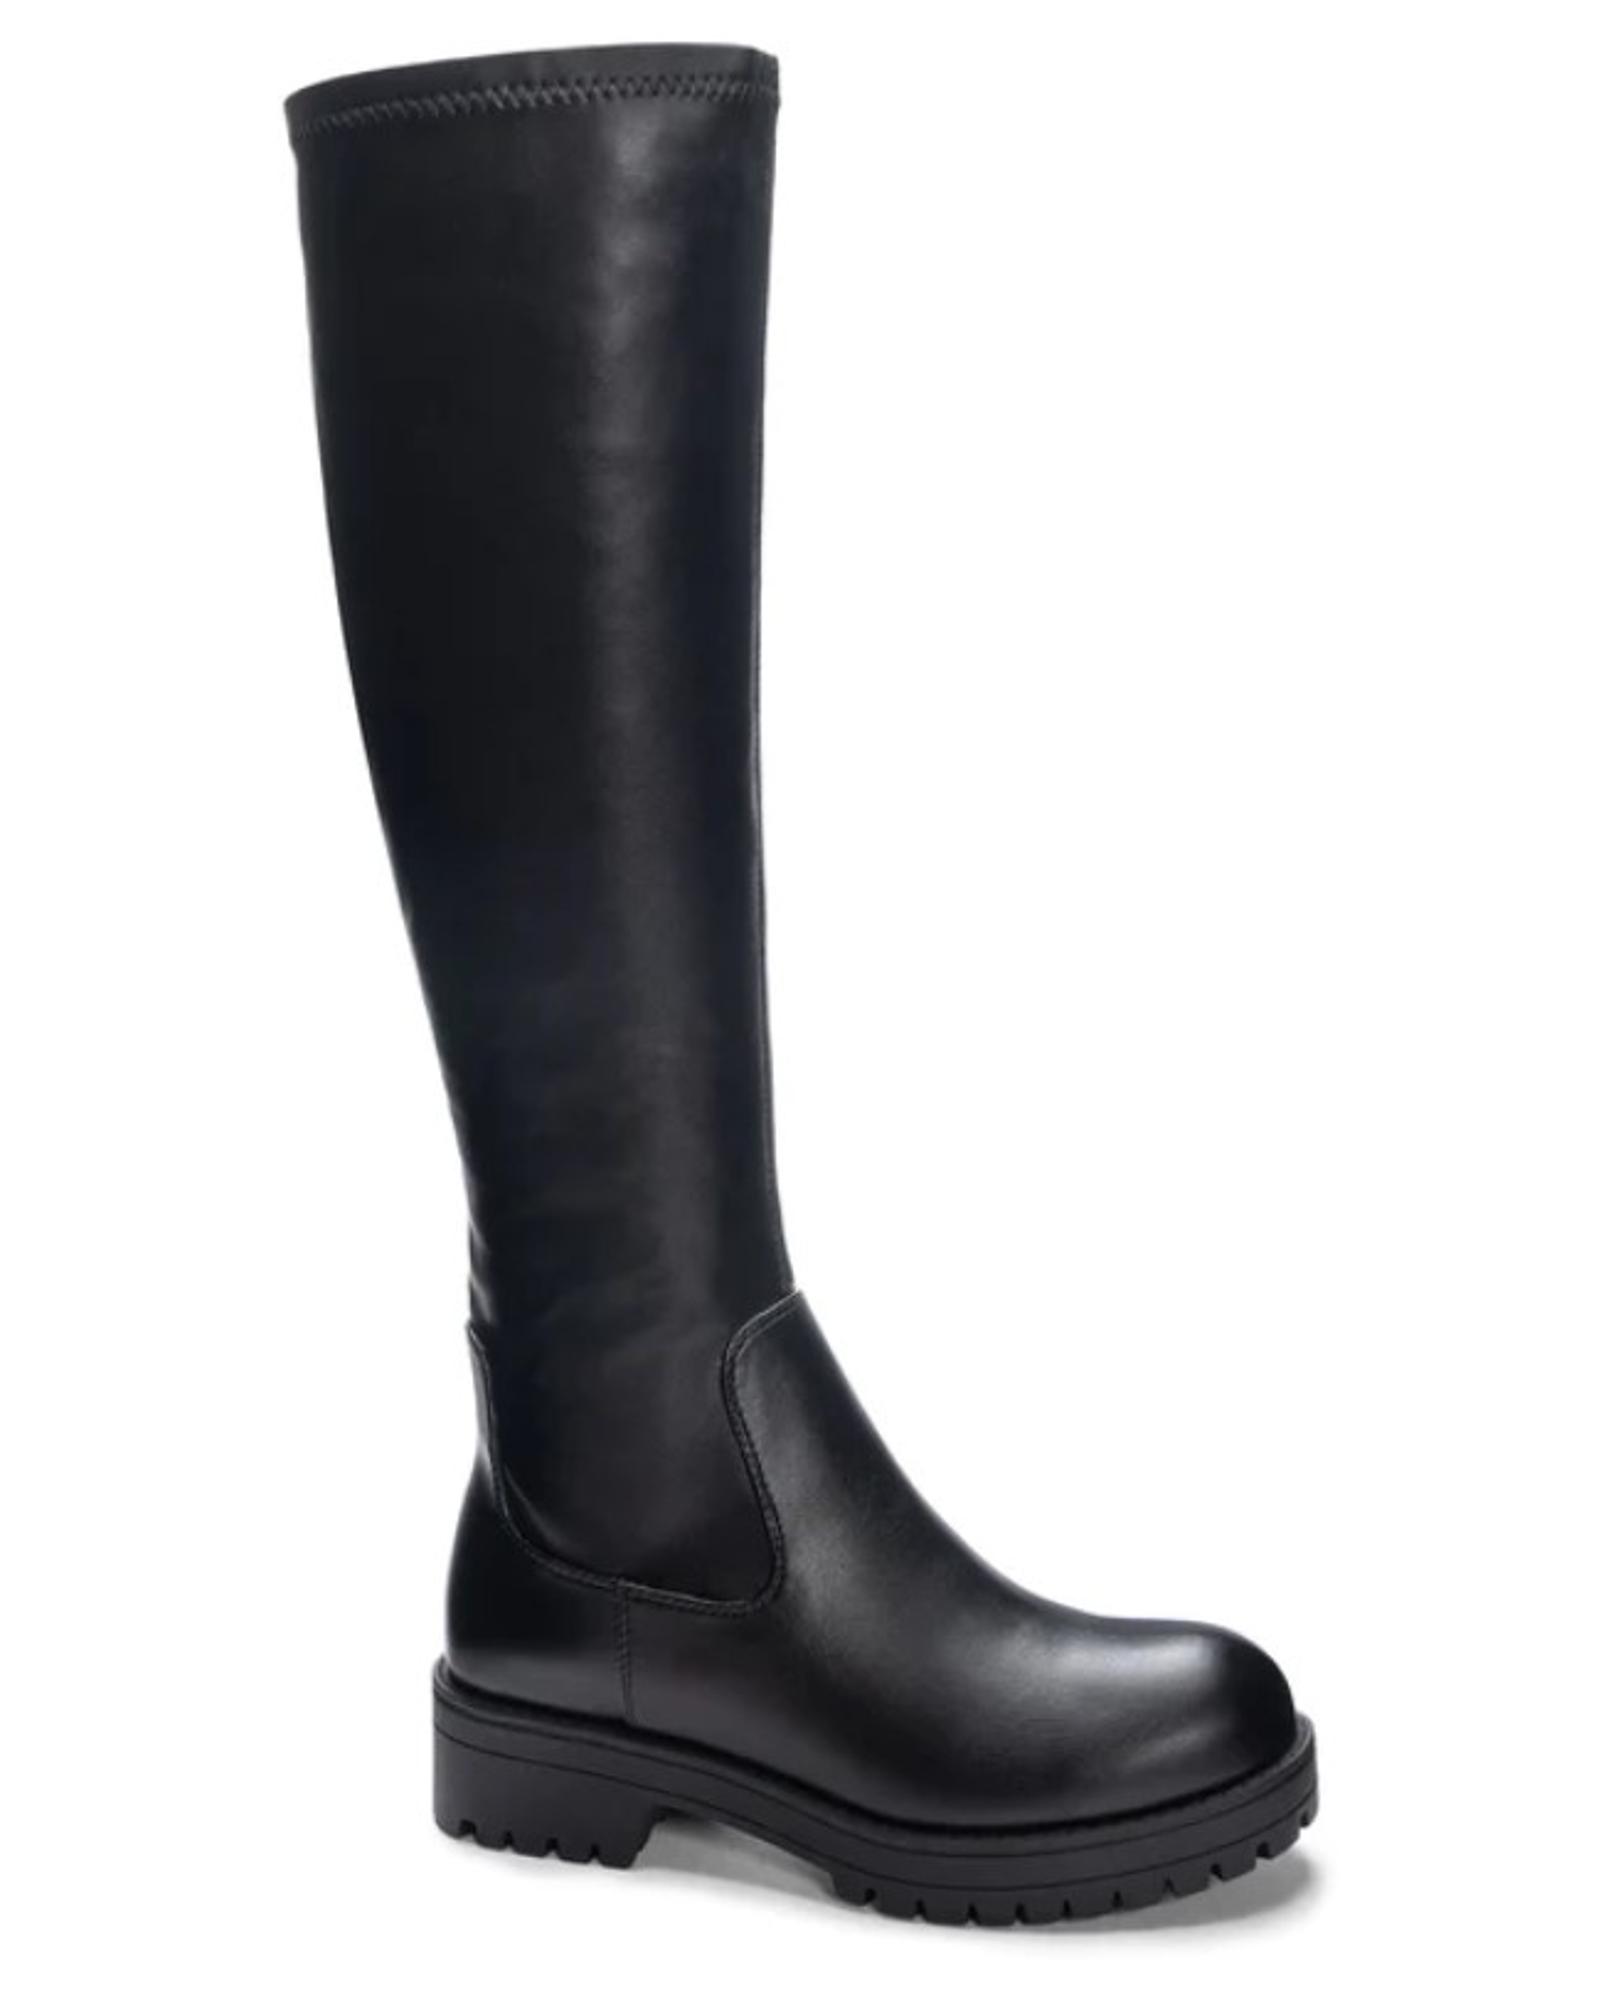 Veelo Tall Boots